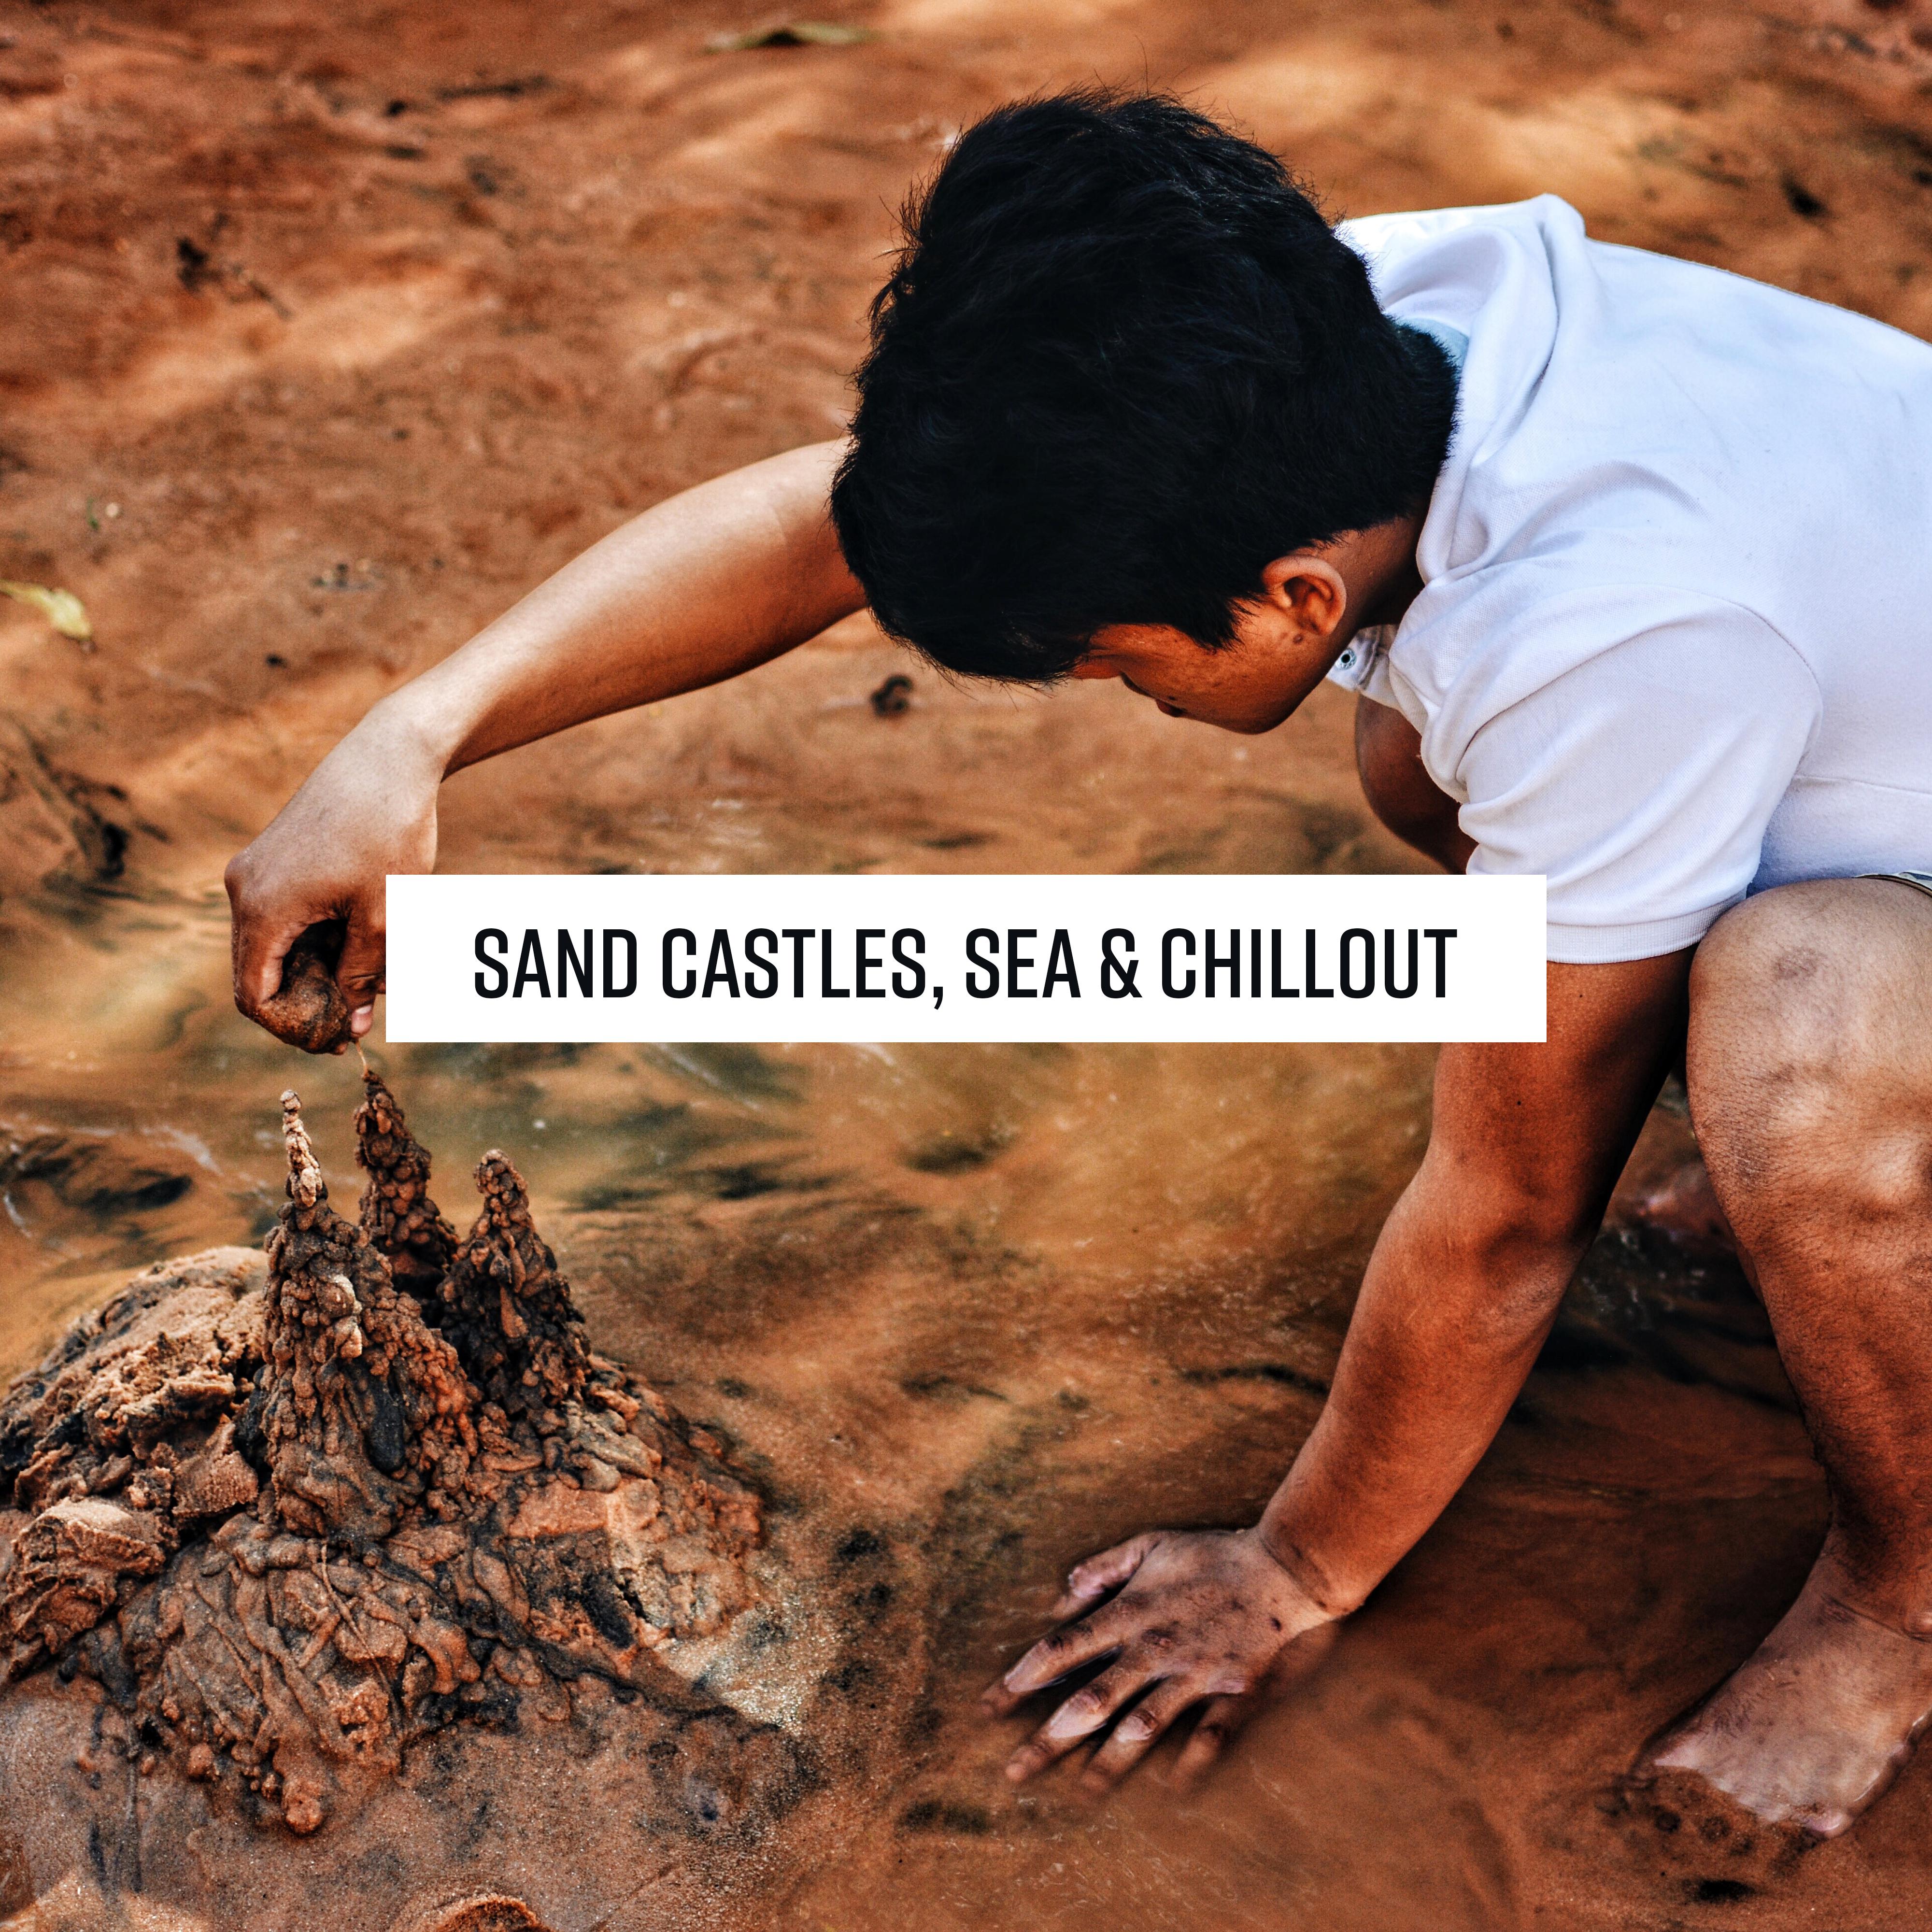 Sand Castles, Sea & Chillout: 2019 Chill Out Electronic Music for Best Vacation Time Spending, Most Relaxing Beats & Melodies, Summer Holiday Beach Relaxation, Sunbathing Songs